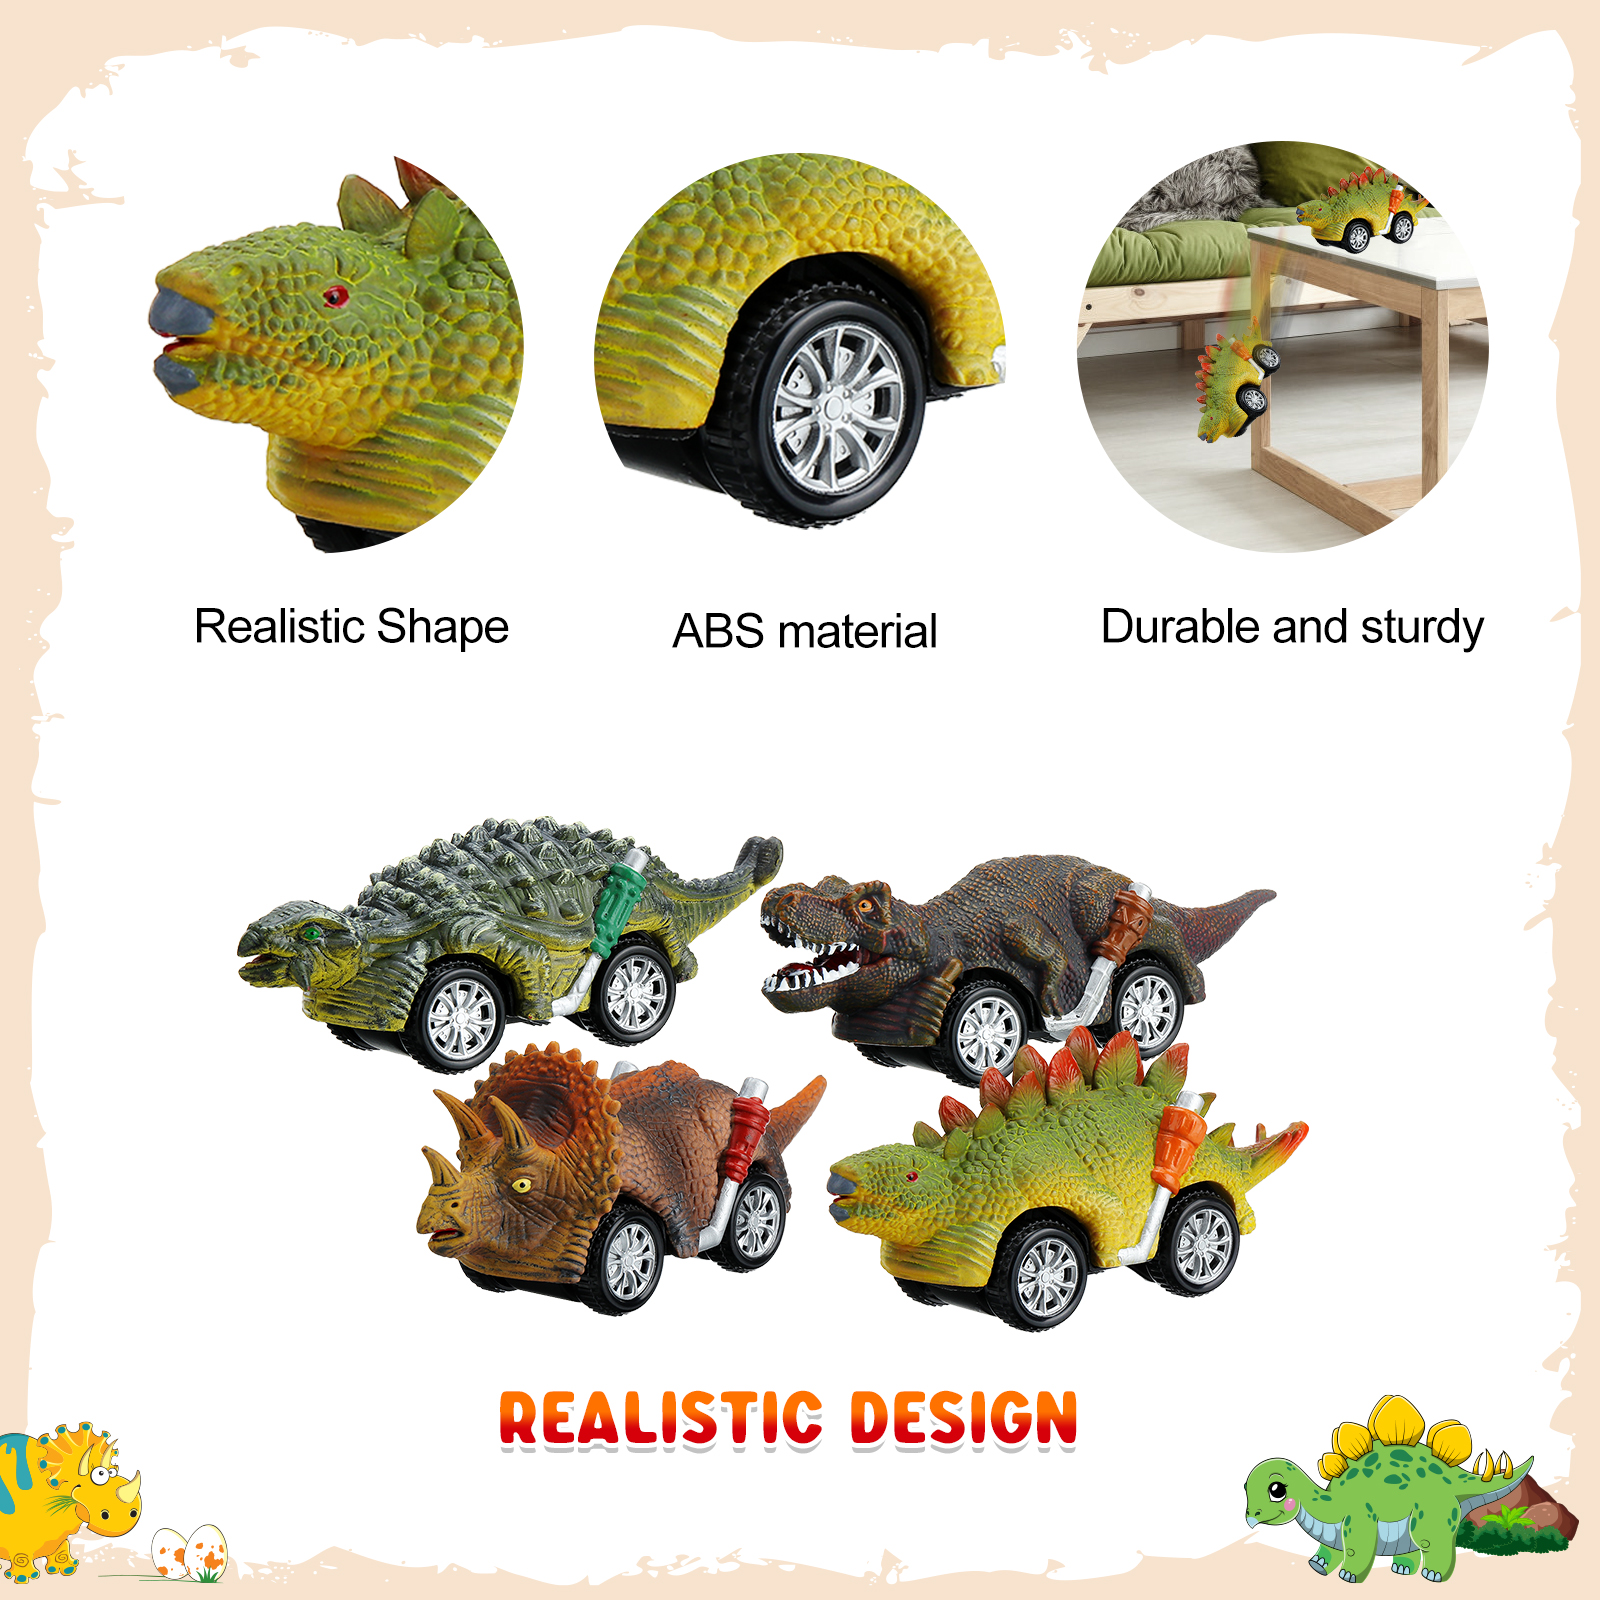 Pickwoo-Dinosaur-Toys-Cars-Inertia-Vehicles-Toddlers-Kids-Dinosaur-Party-Games-with-T-Rex-Dino-Toys--1895631-5